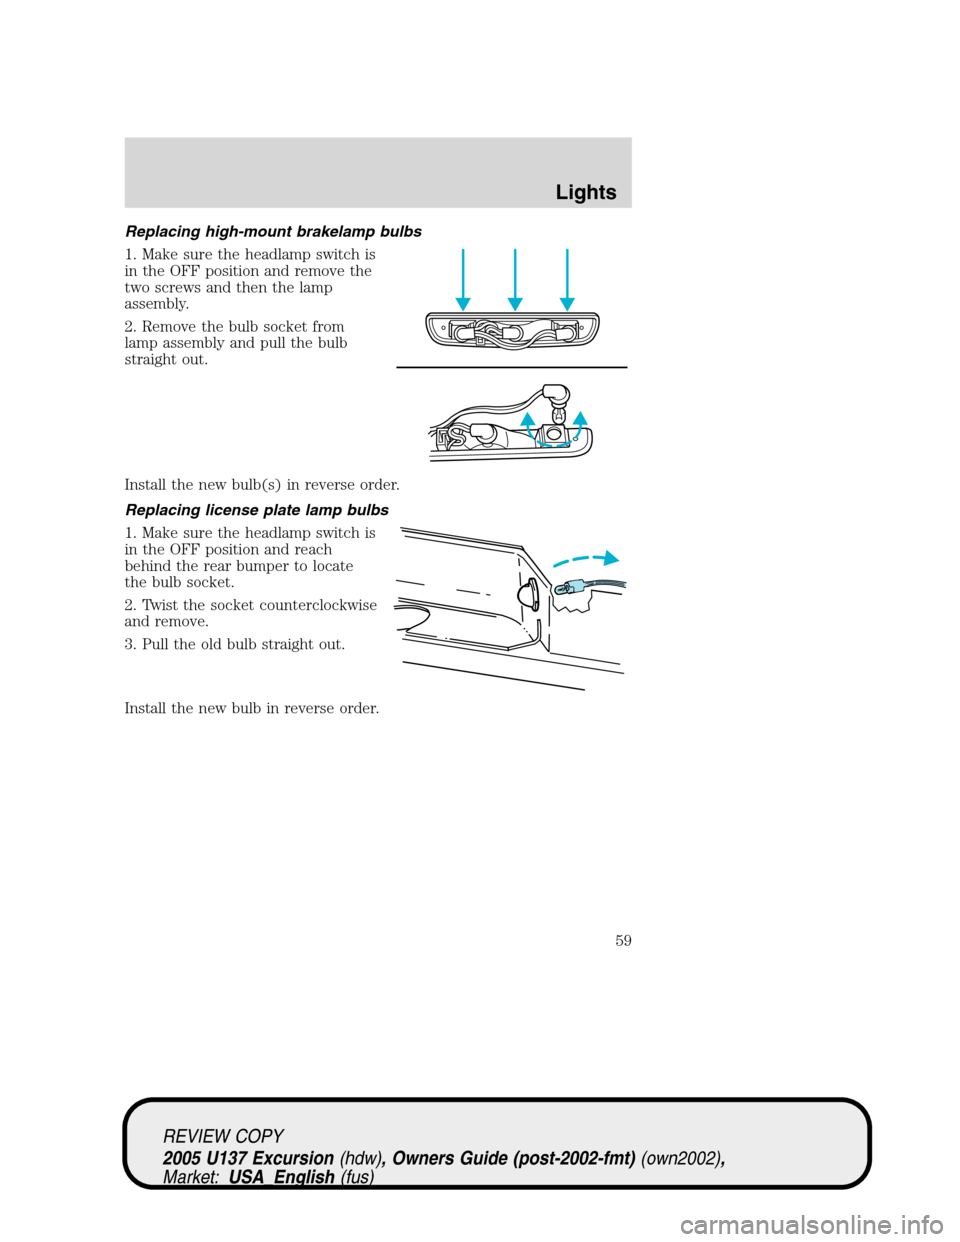 FORD EXCURSION 2005 1.G Workshop Manual Replacing high-mount brakelamp bulbs
1. Make sure the headlamp switch is
in the OFF position and remove the
two screws and then the lamp
assembly.
2. Remove the bulb socket from
lamp assembly and pull